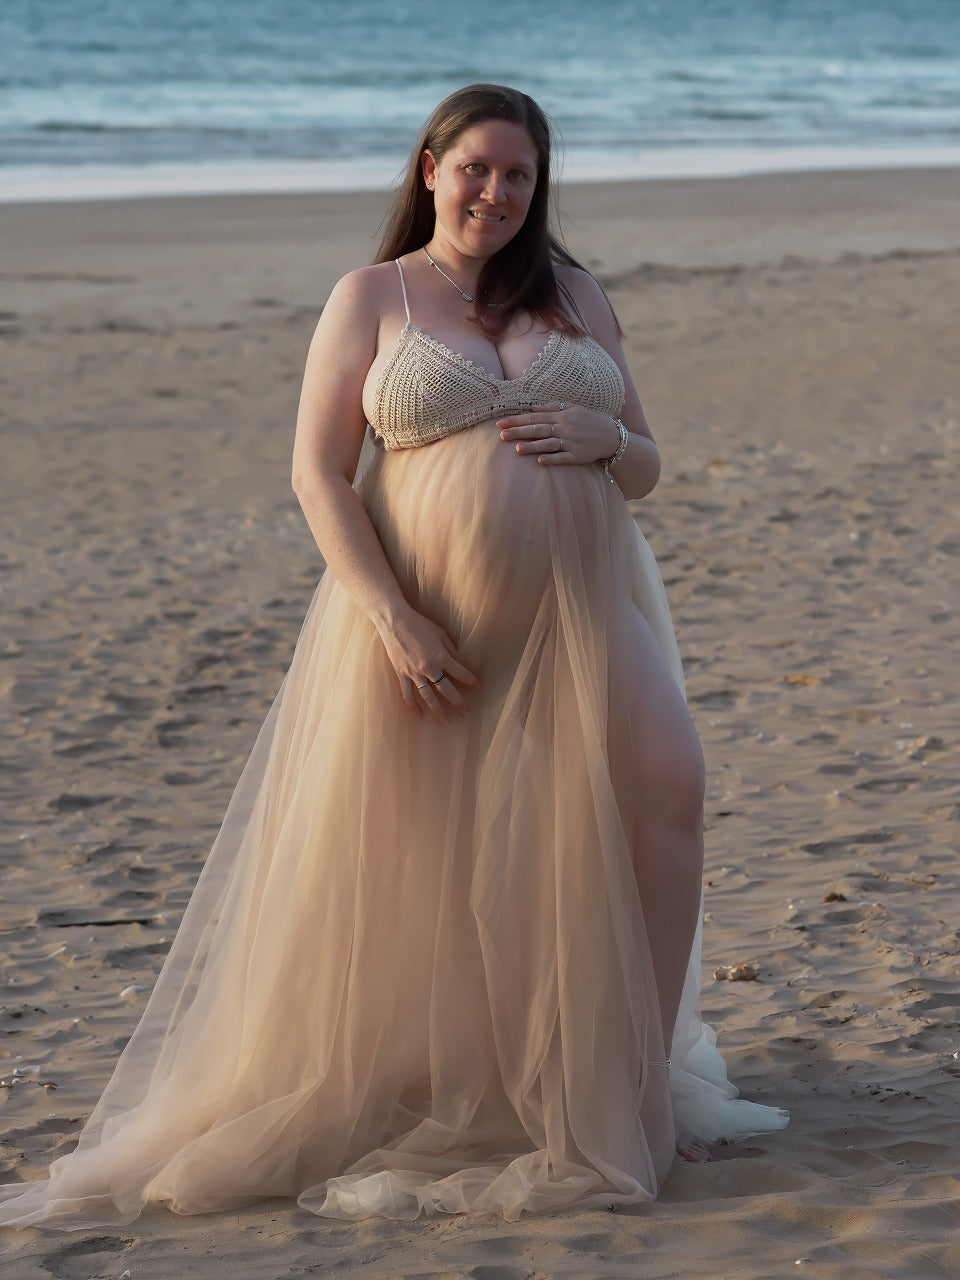 Dress Hire - Maternity Photoshoot Dresses - D&J - Lace and Tulle Dress - DAY RENTAL